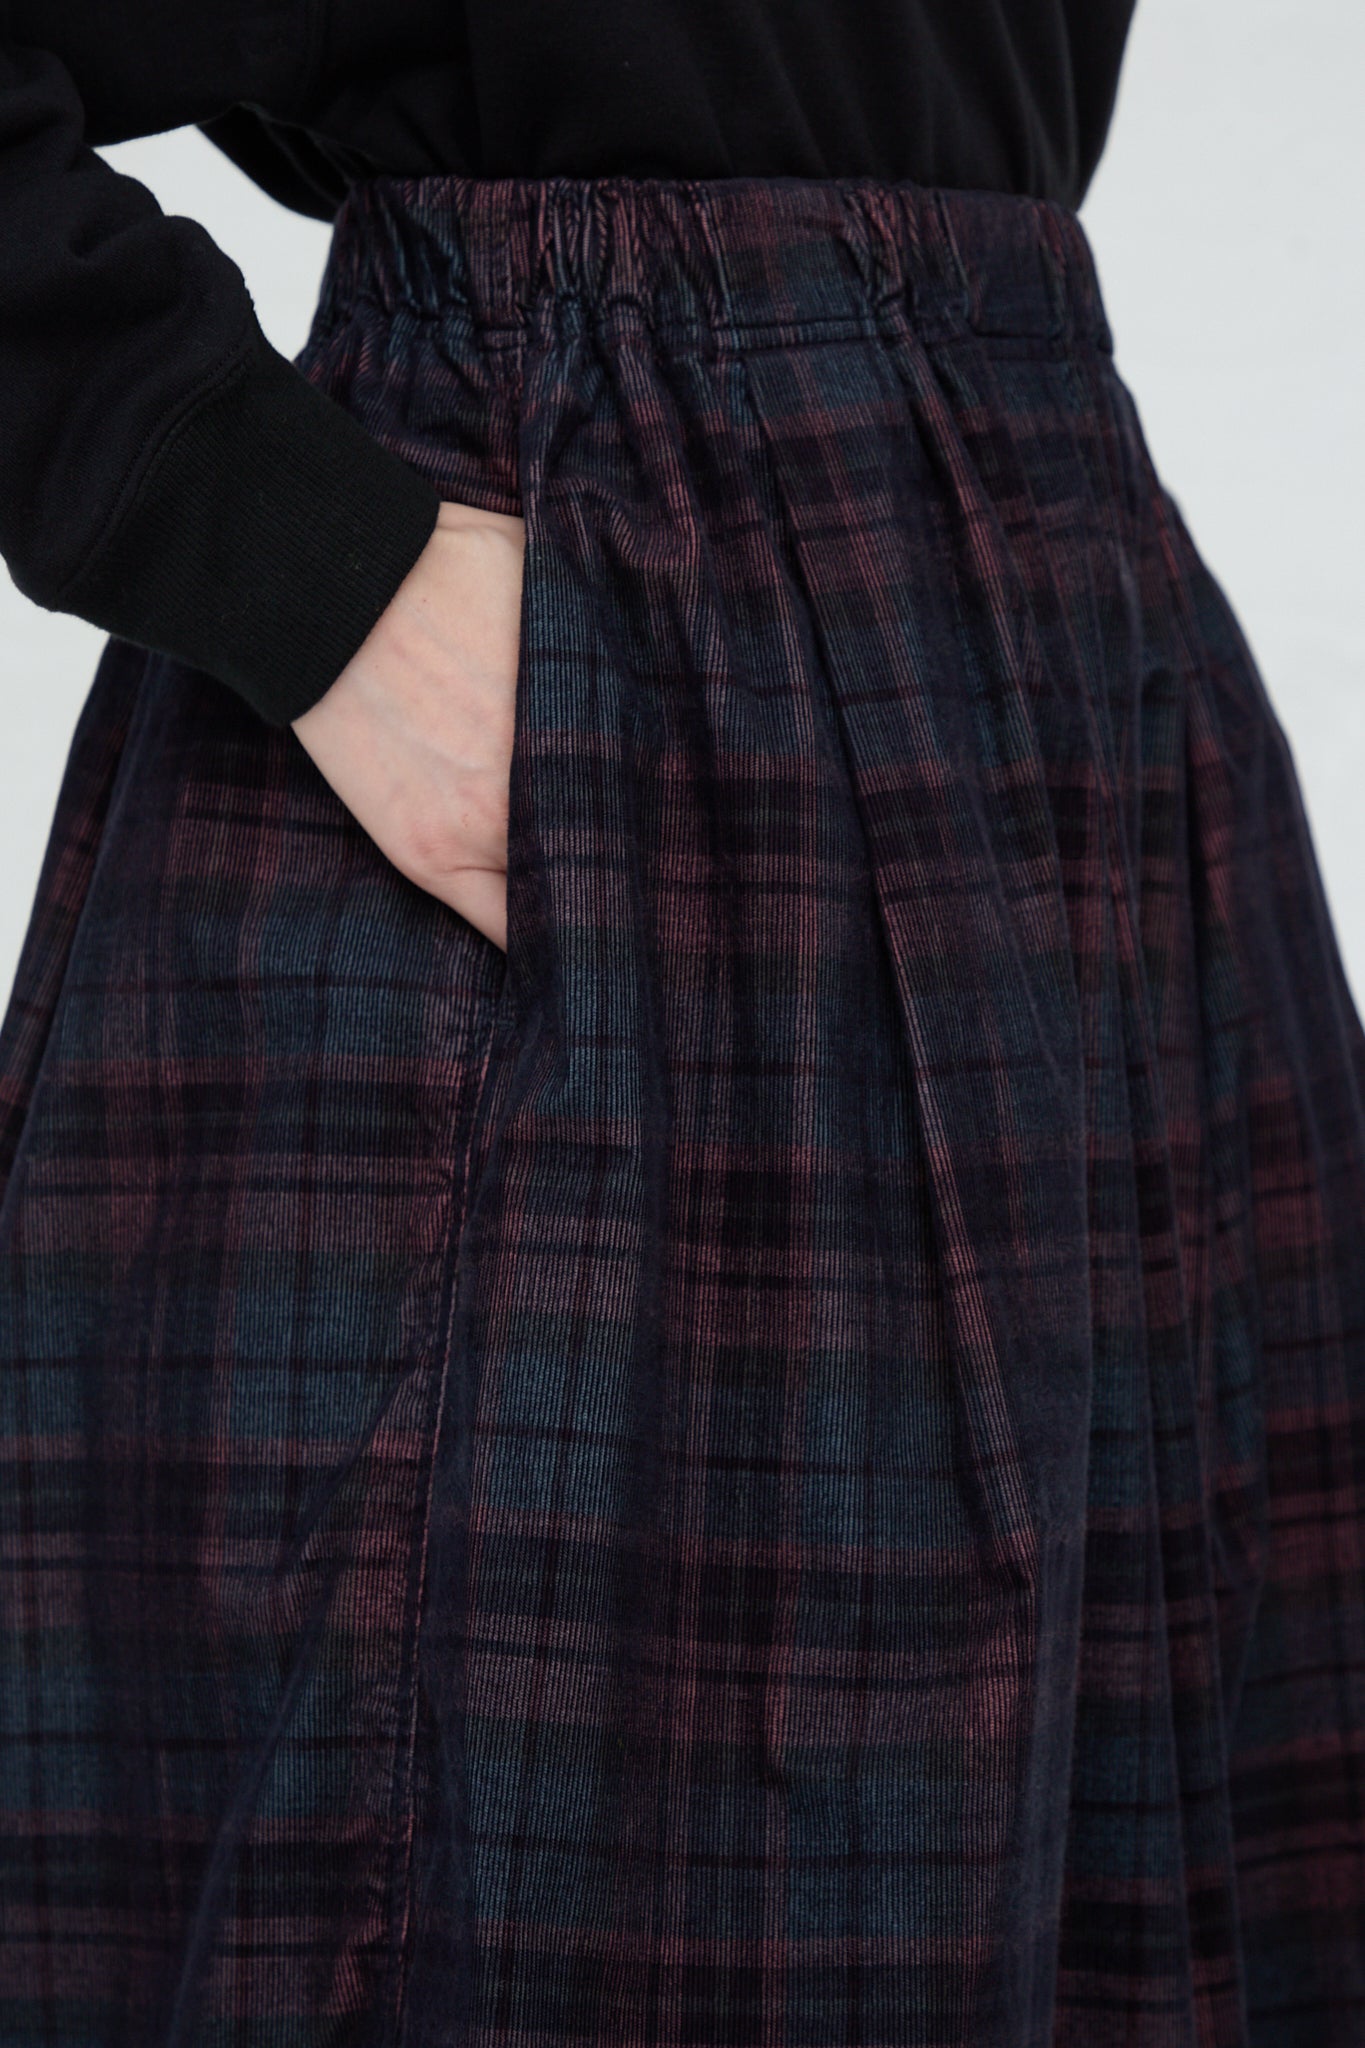 A woman wearing a Woven Cotton Skirt in Navy by Ichi. Up close view. Hand in pocket.